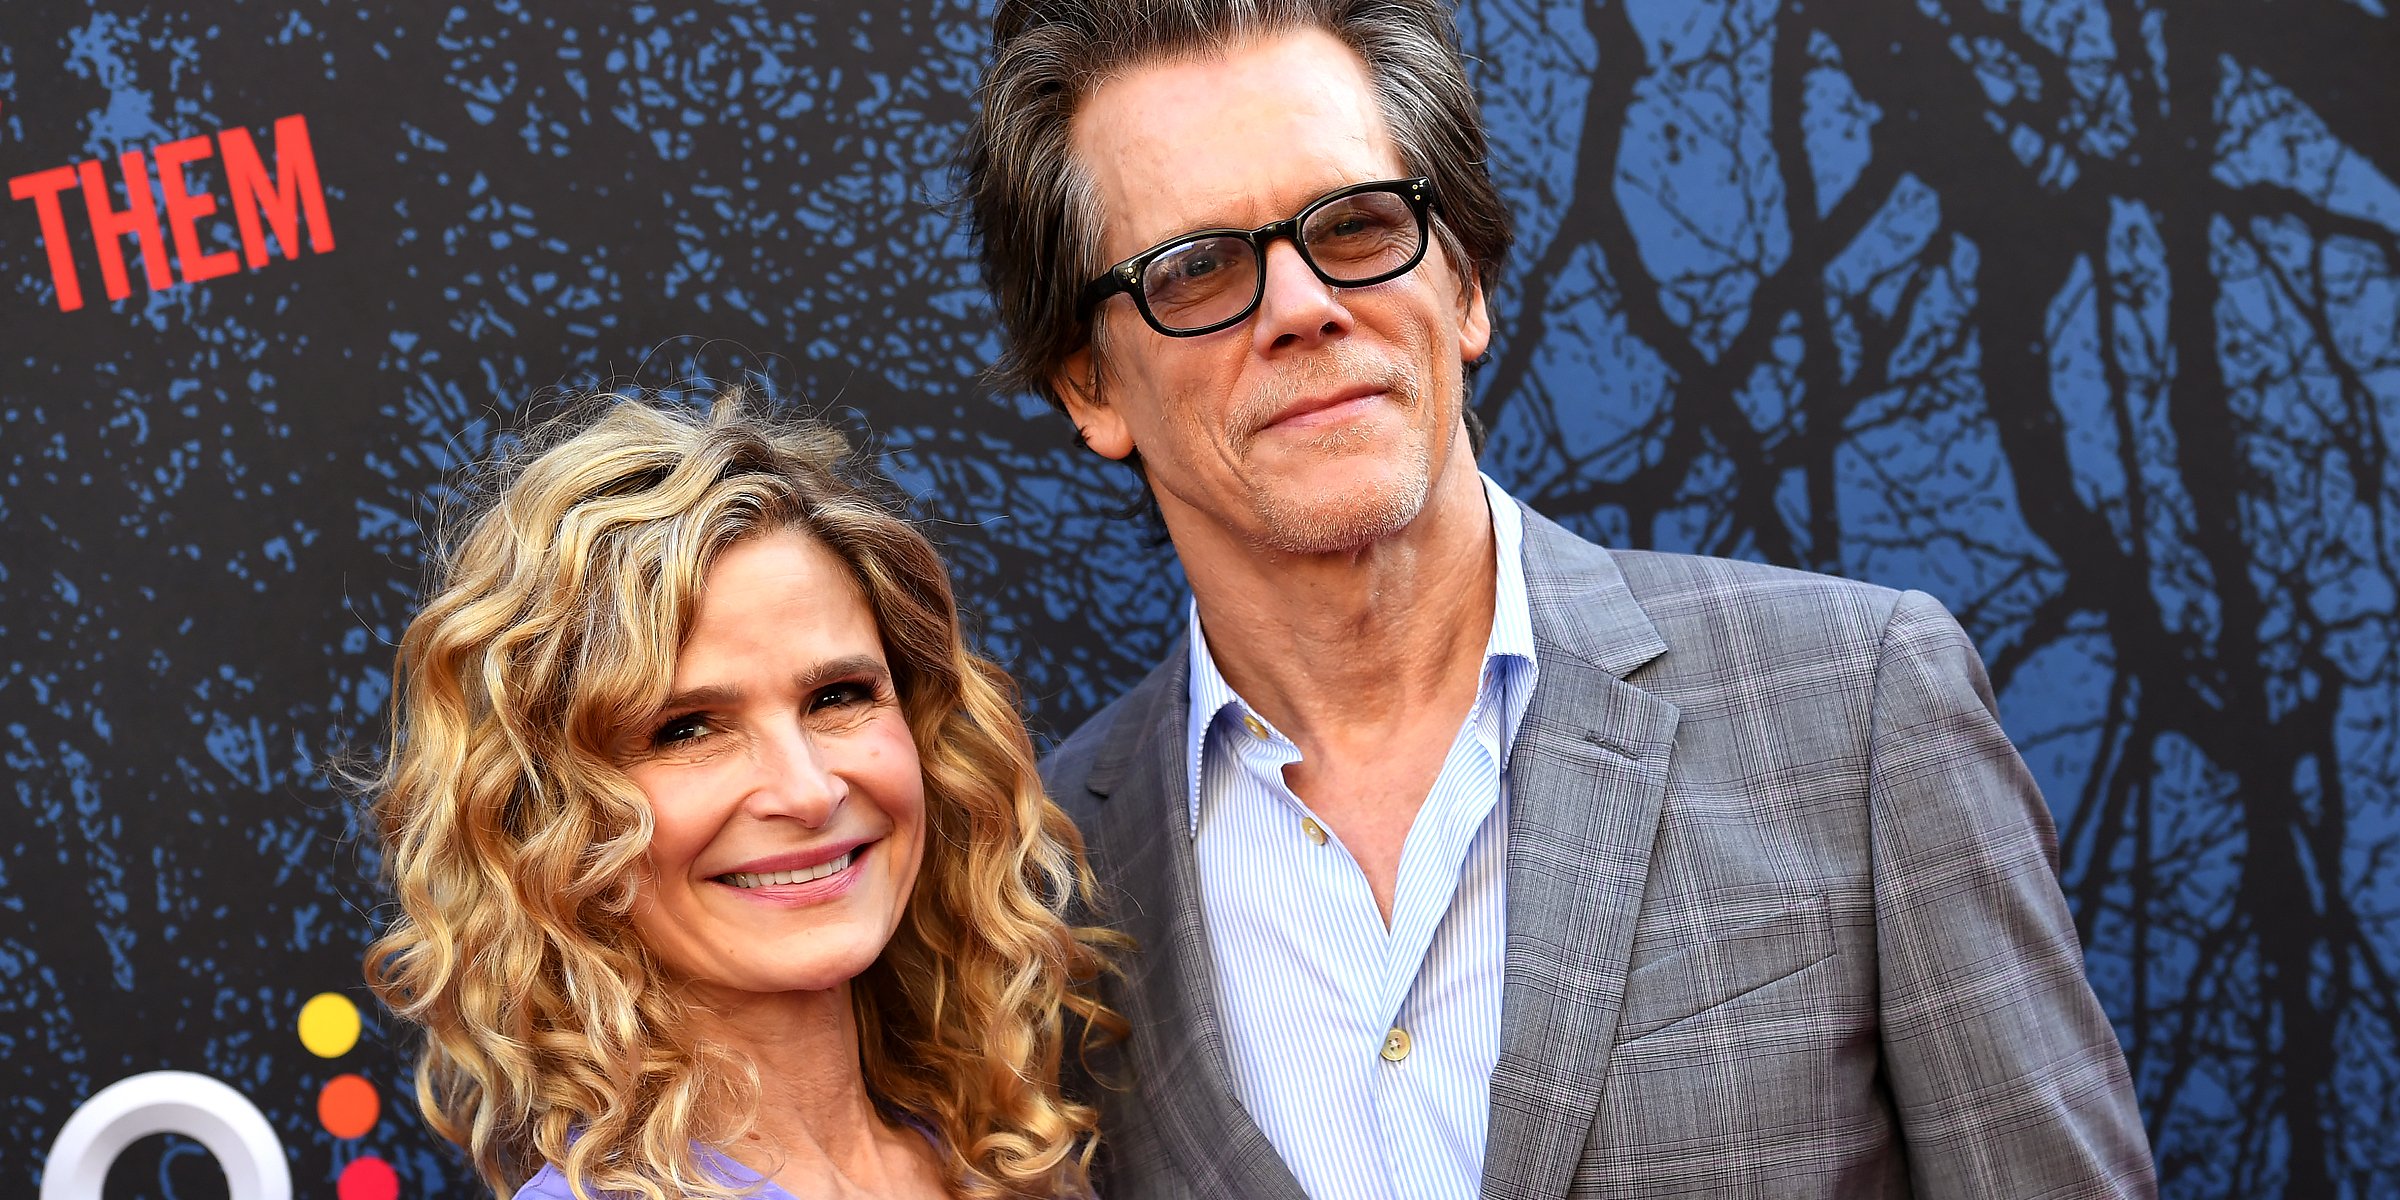 Kevin Bacon and Kyra Sedgwick | Source: Getty Images